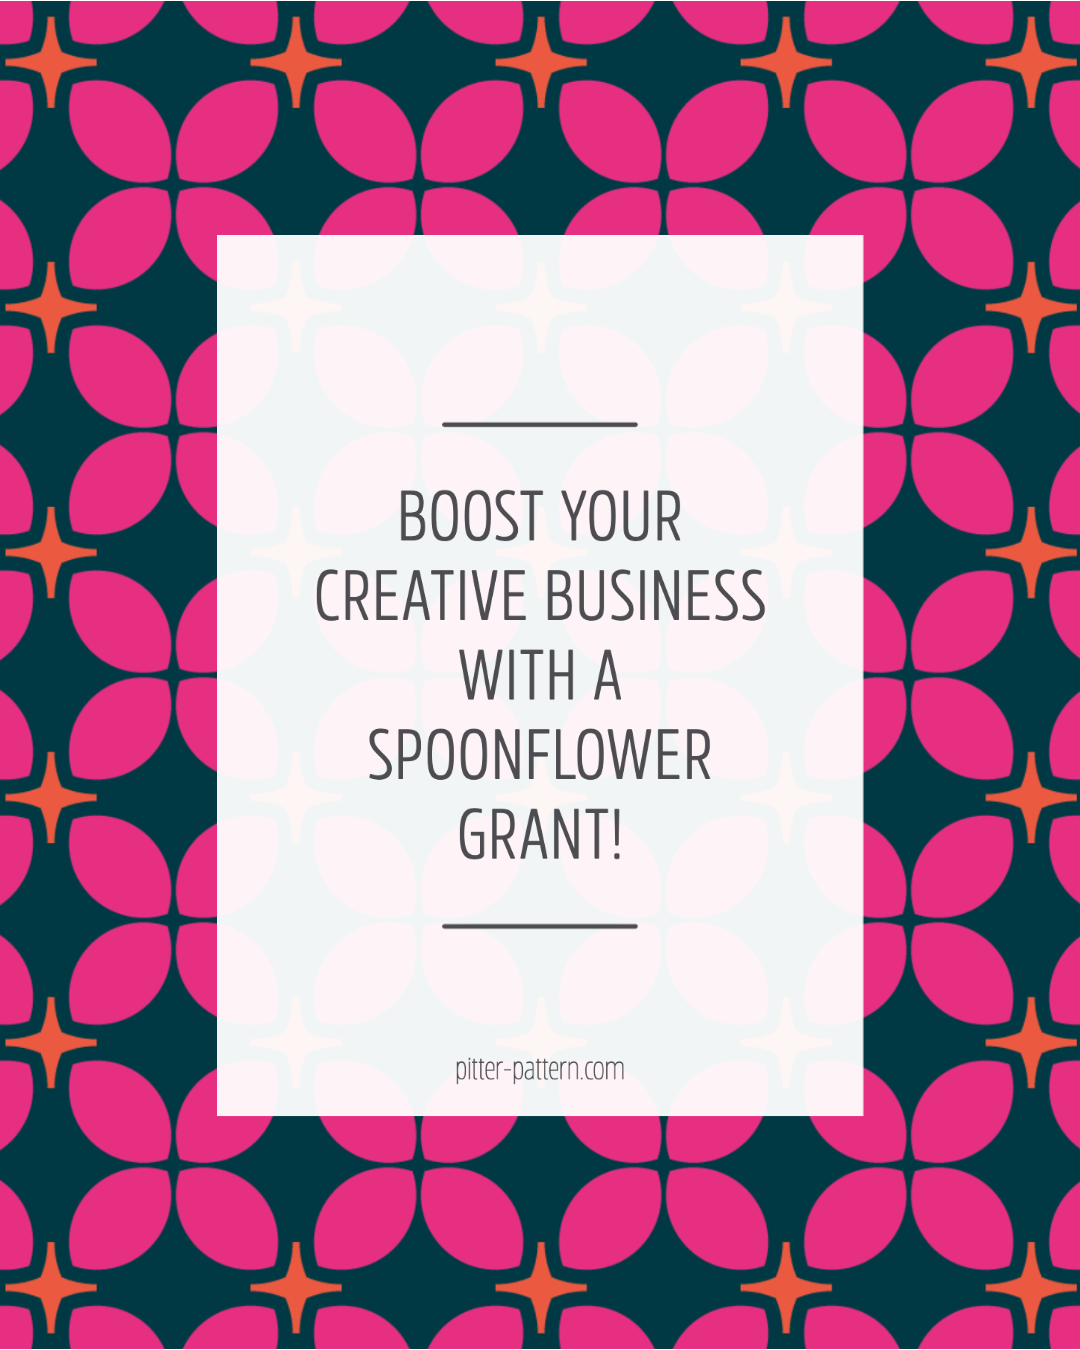 Boost your creative business with a Spoonflower Grant!